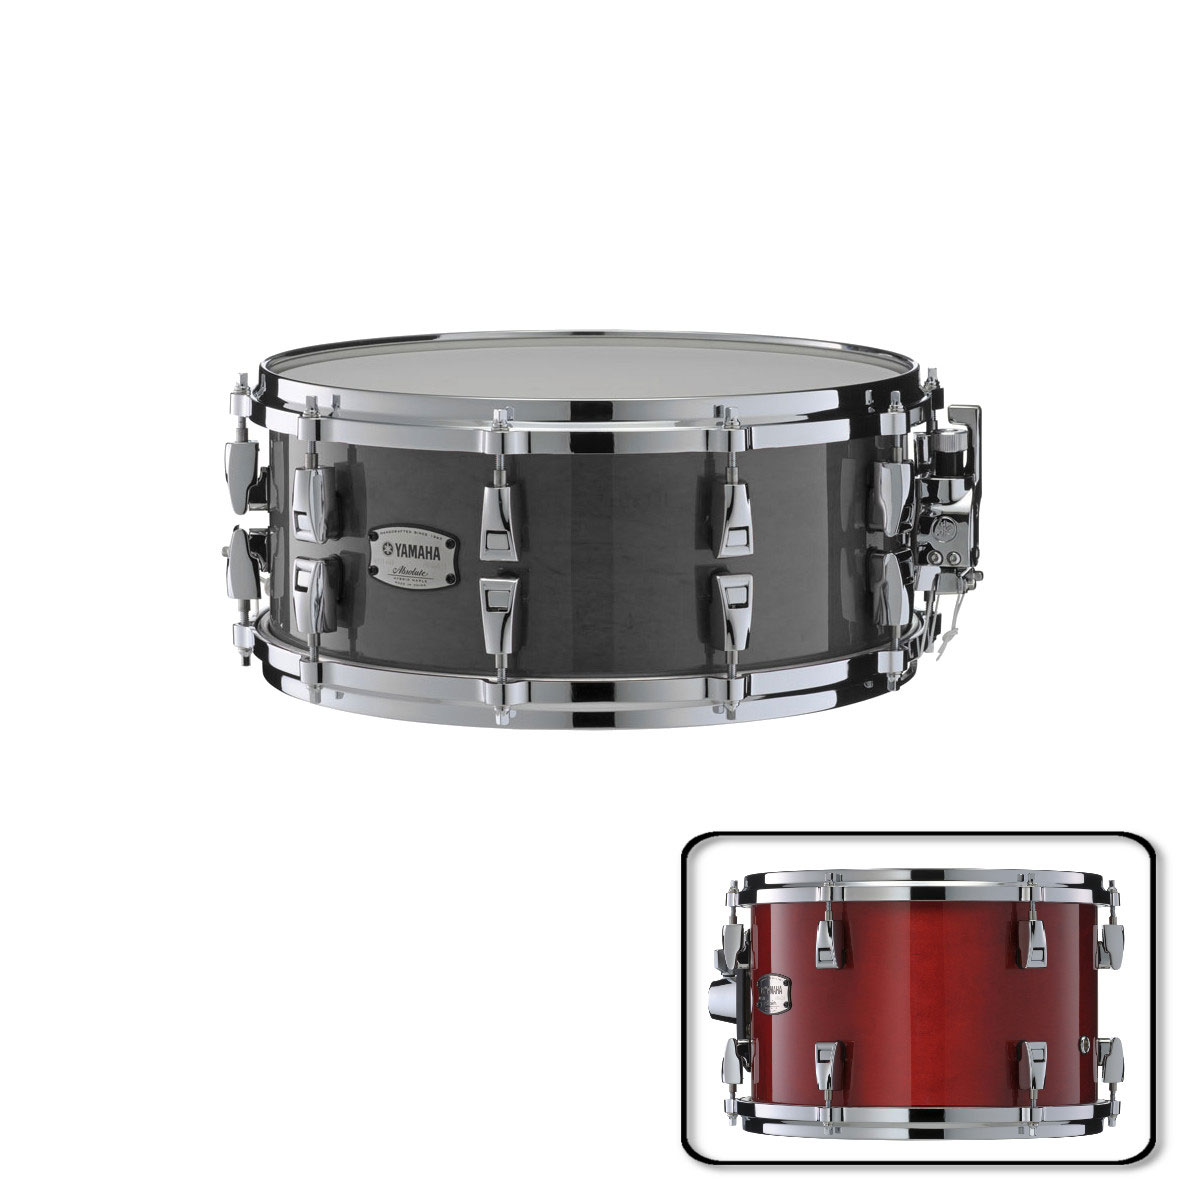 YAMAHA AMS1460 - ABSOLUTE HYBRID MAPLE C CLAIRE 14X6 RED AUTUMN